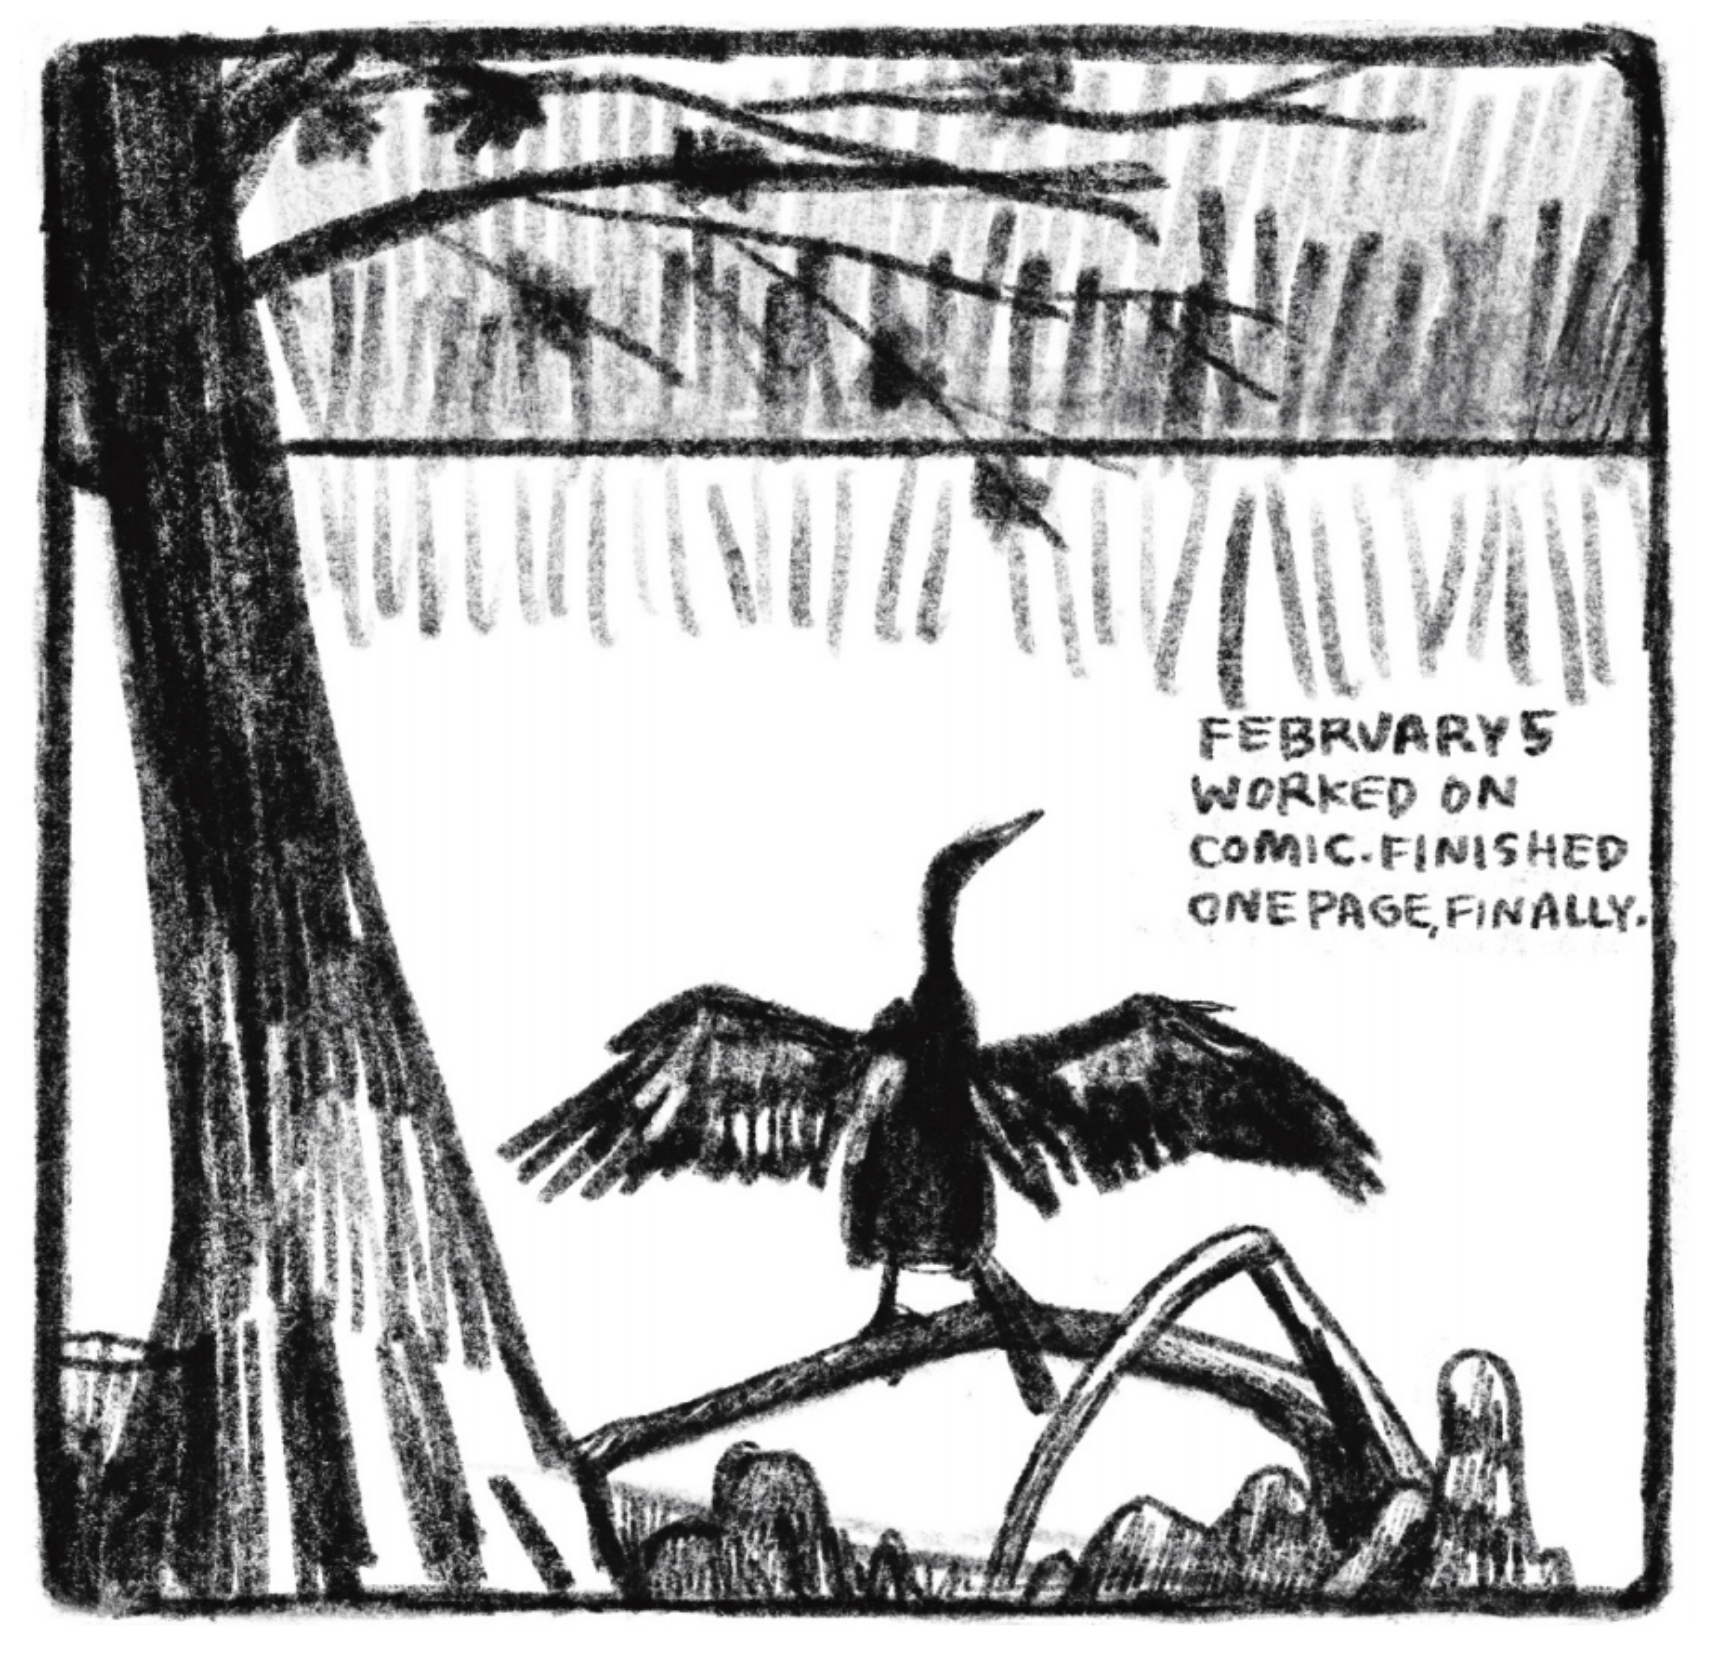 Hold Still Episode 7, Panel 2 "Feb 5. Worked on comic. Finished one page, finally." Drawing of an anhinga drying its wings